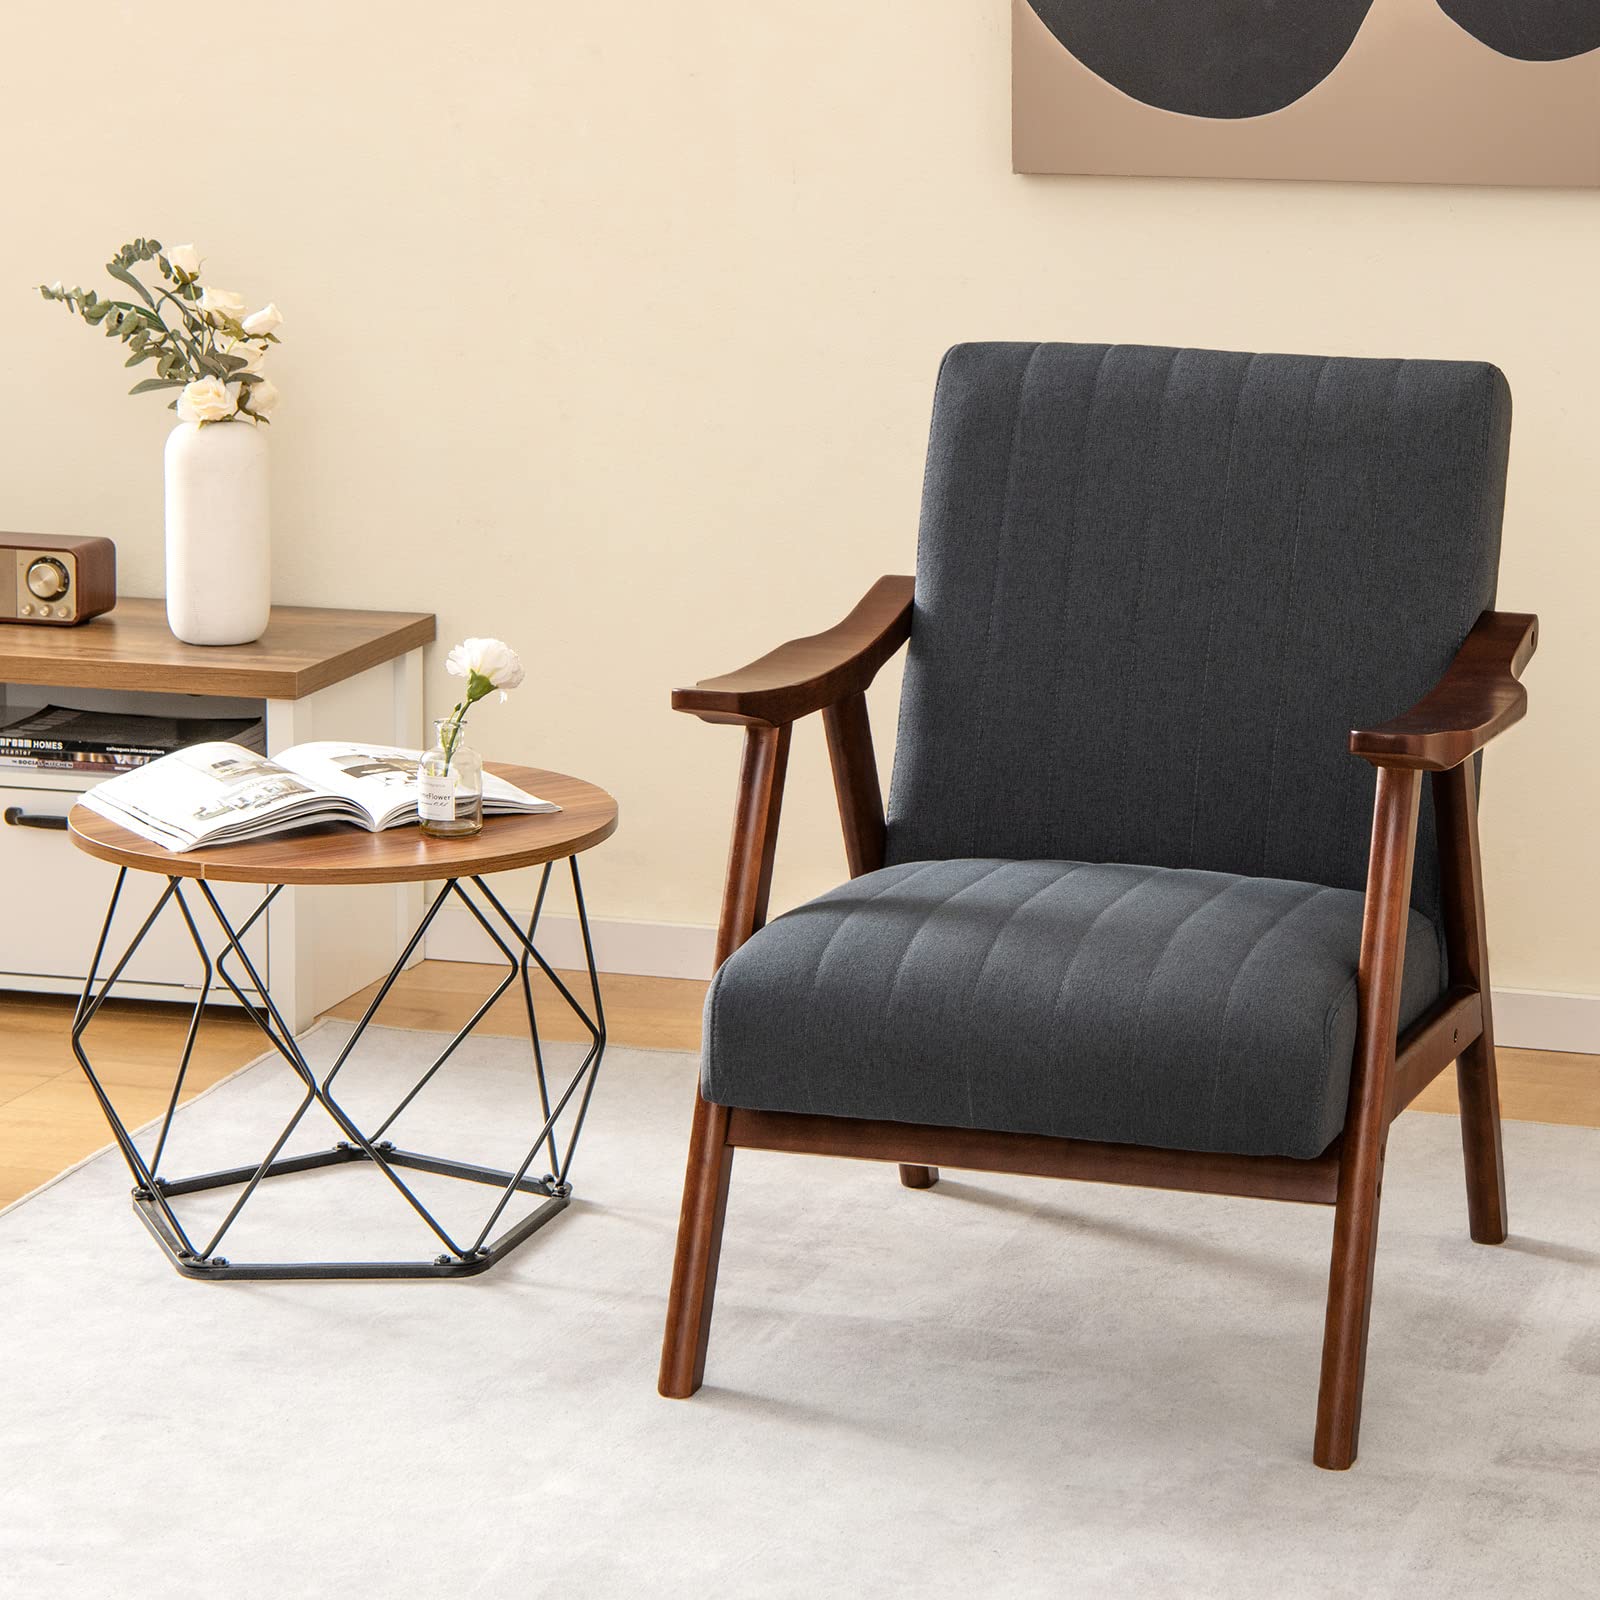 Giantex Mid-Century Modern Accent Chair - Comfy Upholstered Lounge Chair with Arms, Anti-Slip Felt Pads